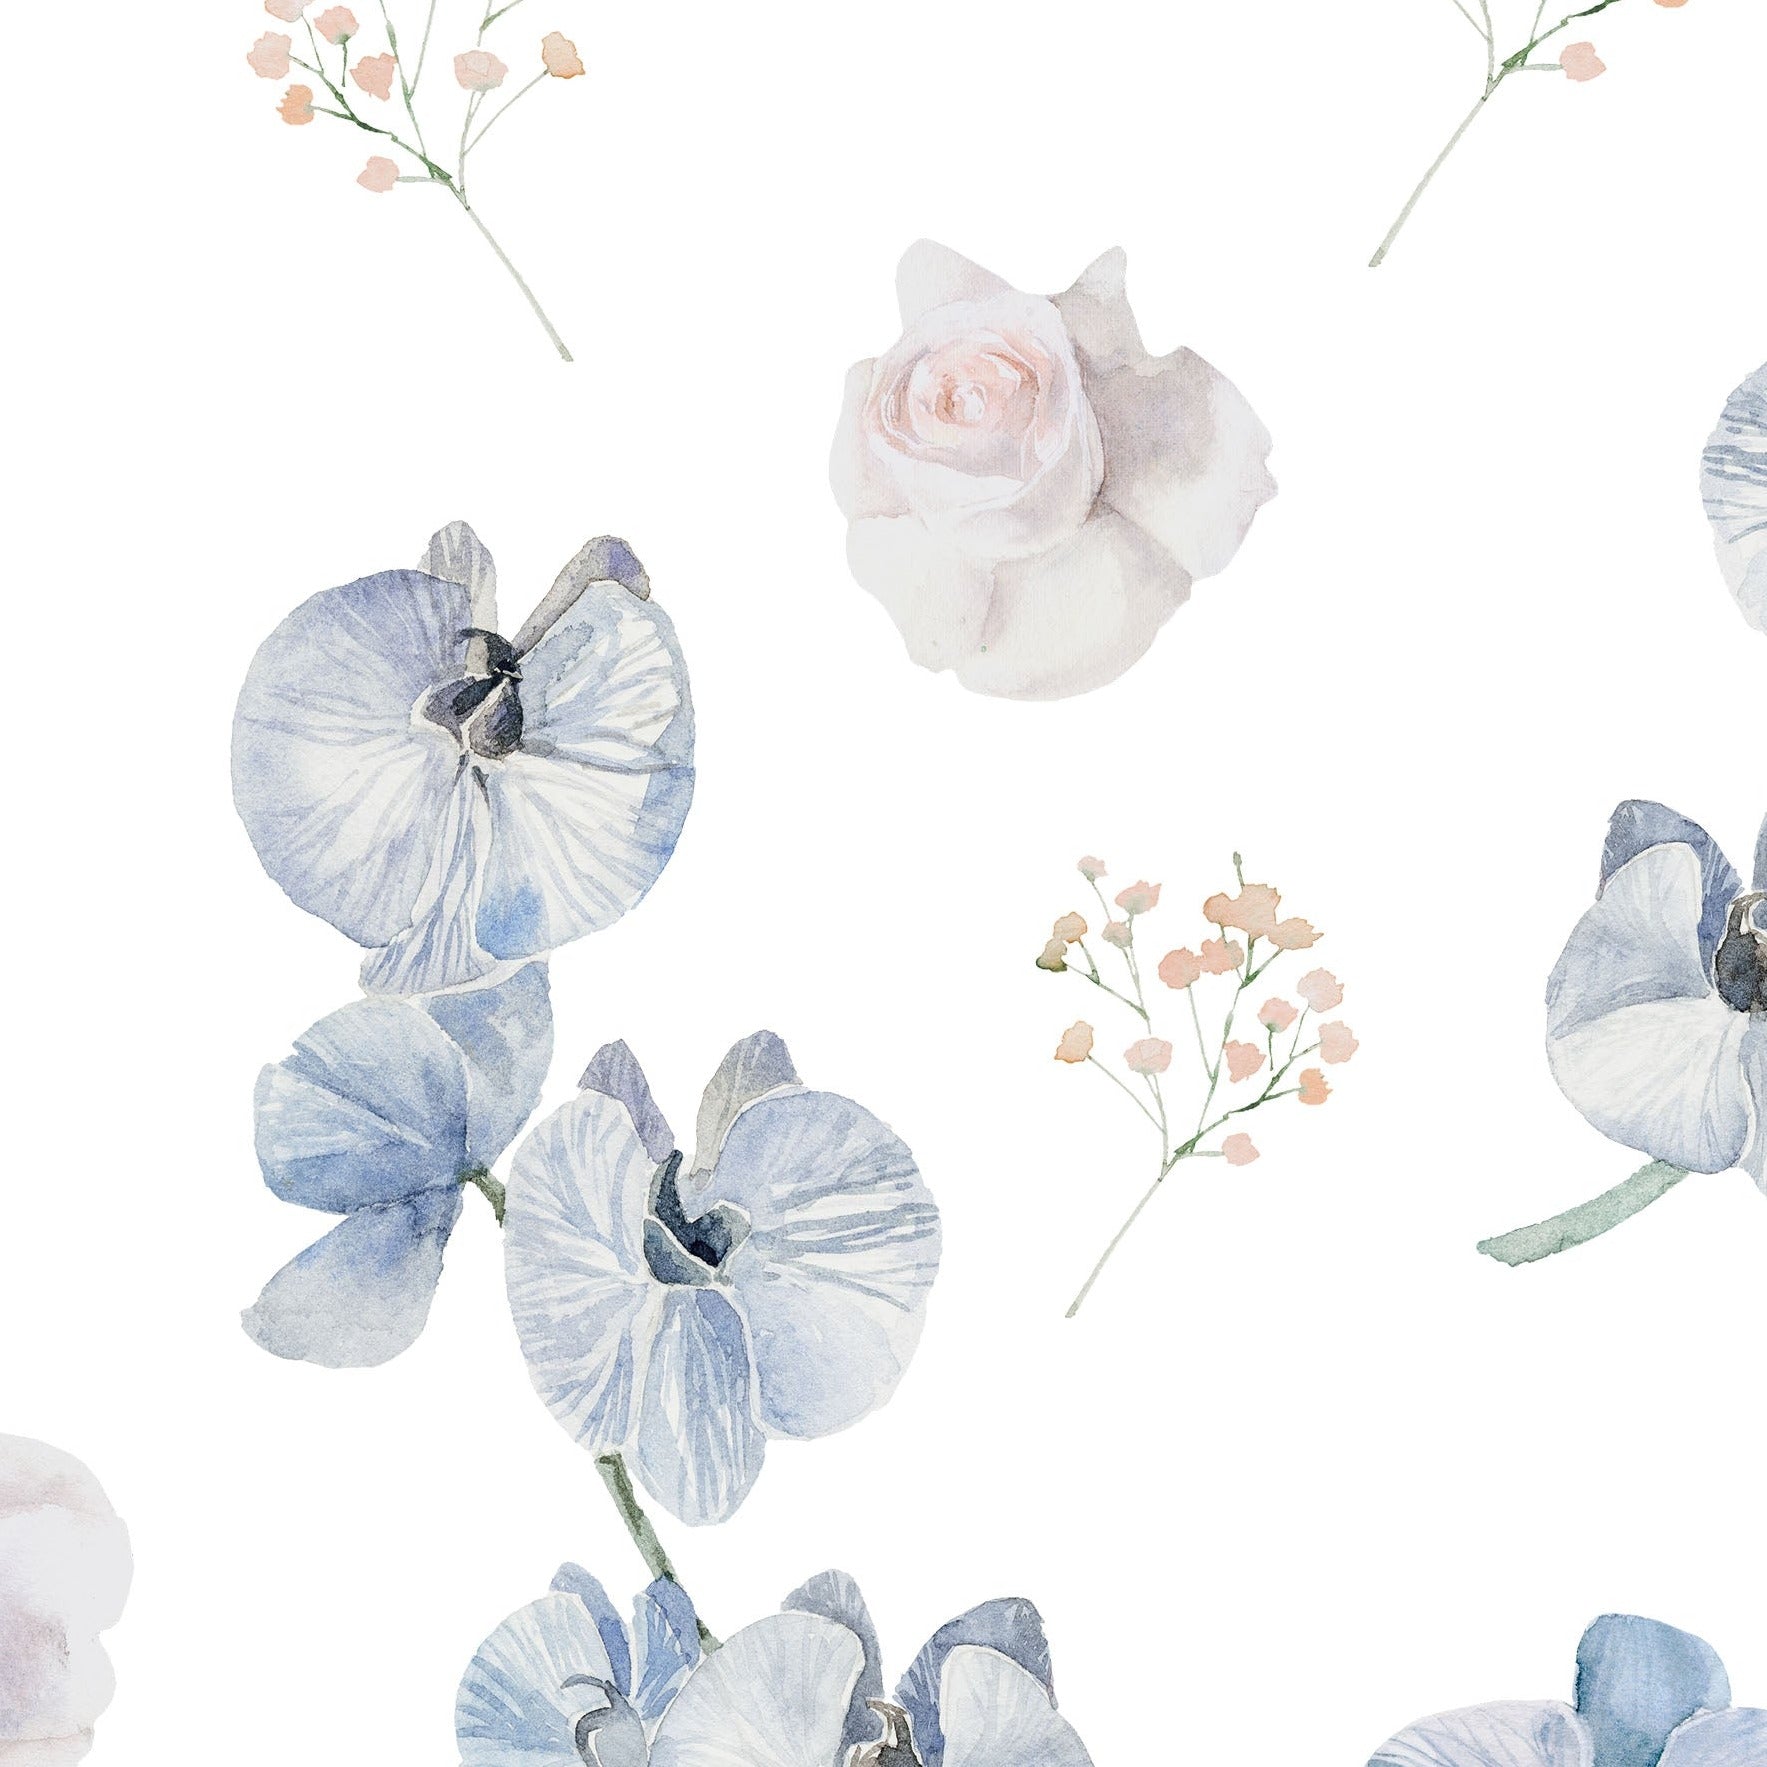 A close-up view of dreamy orchid wallpaper showcasing a delicate pattern of blue orchids, soft pink roses, and small sprigs of baby's breath on a light background. The detailed design and soft colors create a serene and elegant look, perfect for adding a touch of nature to any room.